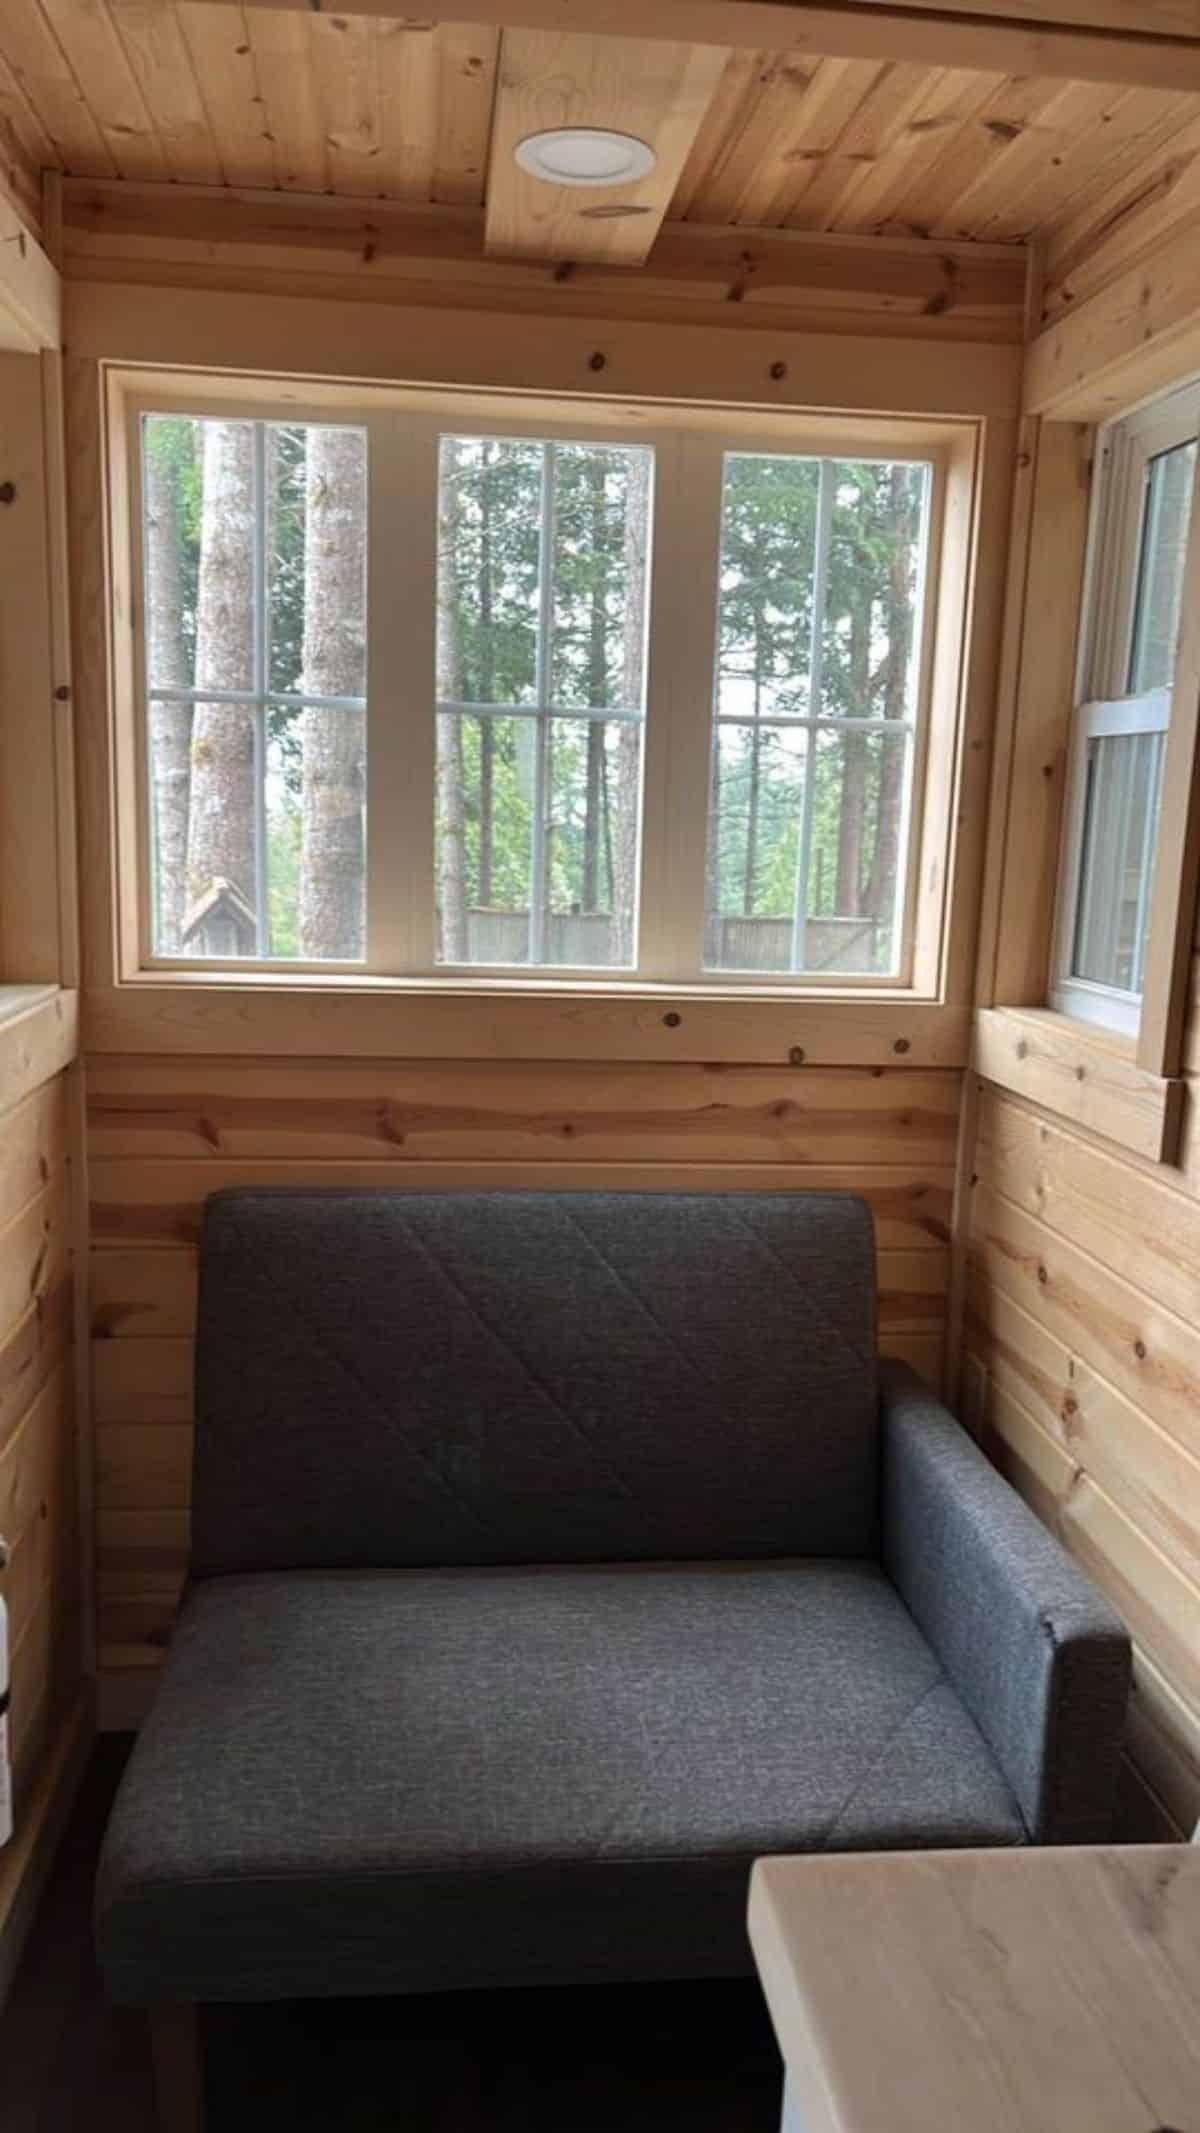 living area has a 3 seater couch